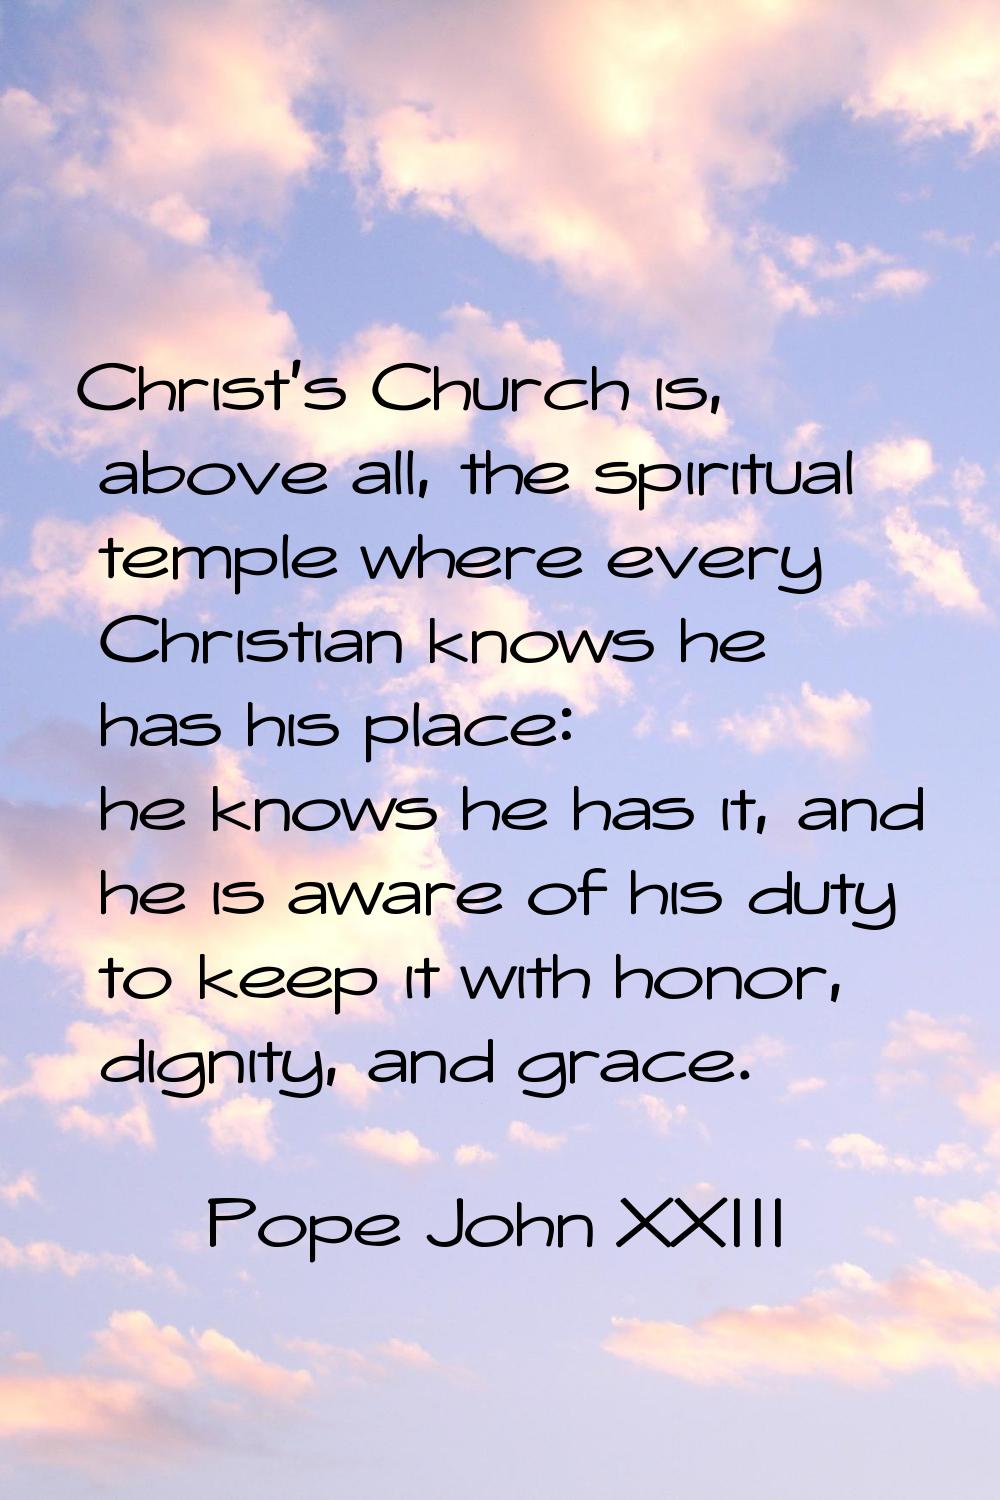 Christ's Church is, above all, the spiritual temple where every Christian knows he has his place: h